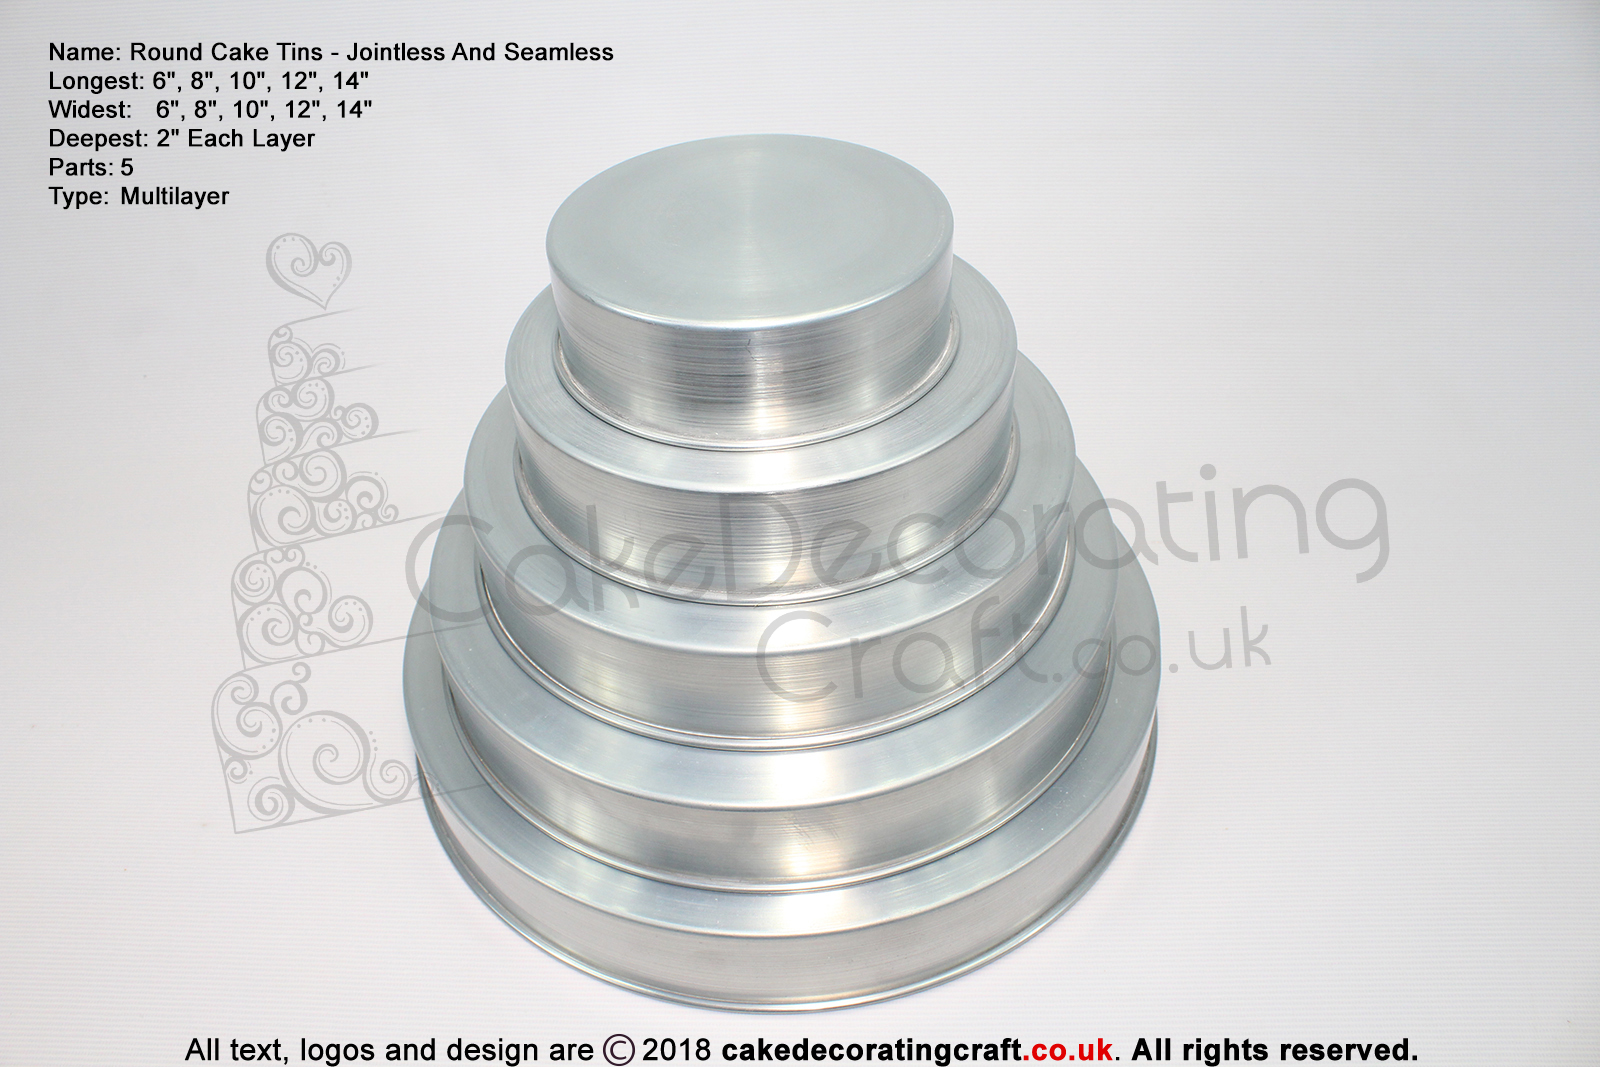 Round Cake Baking Tin | 2" Deep | Size 6 8 10 12 14 " | 5 Tiers | Jointless And Seamless | Rainbow | Multi Layer